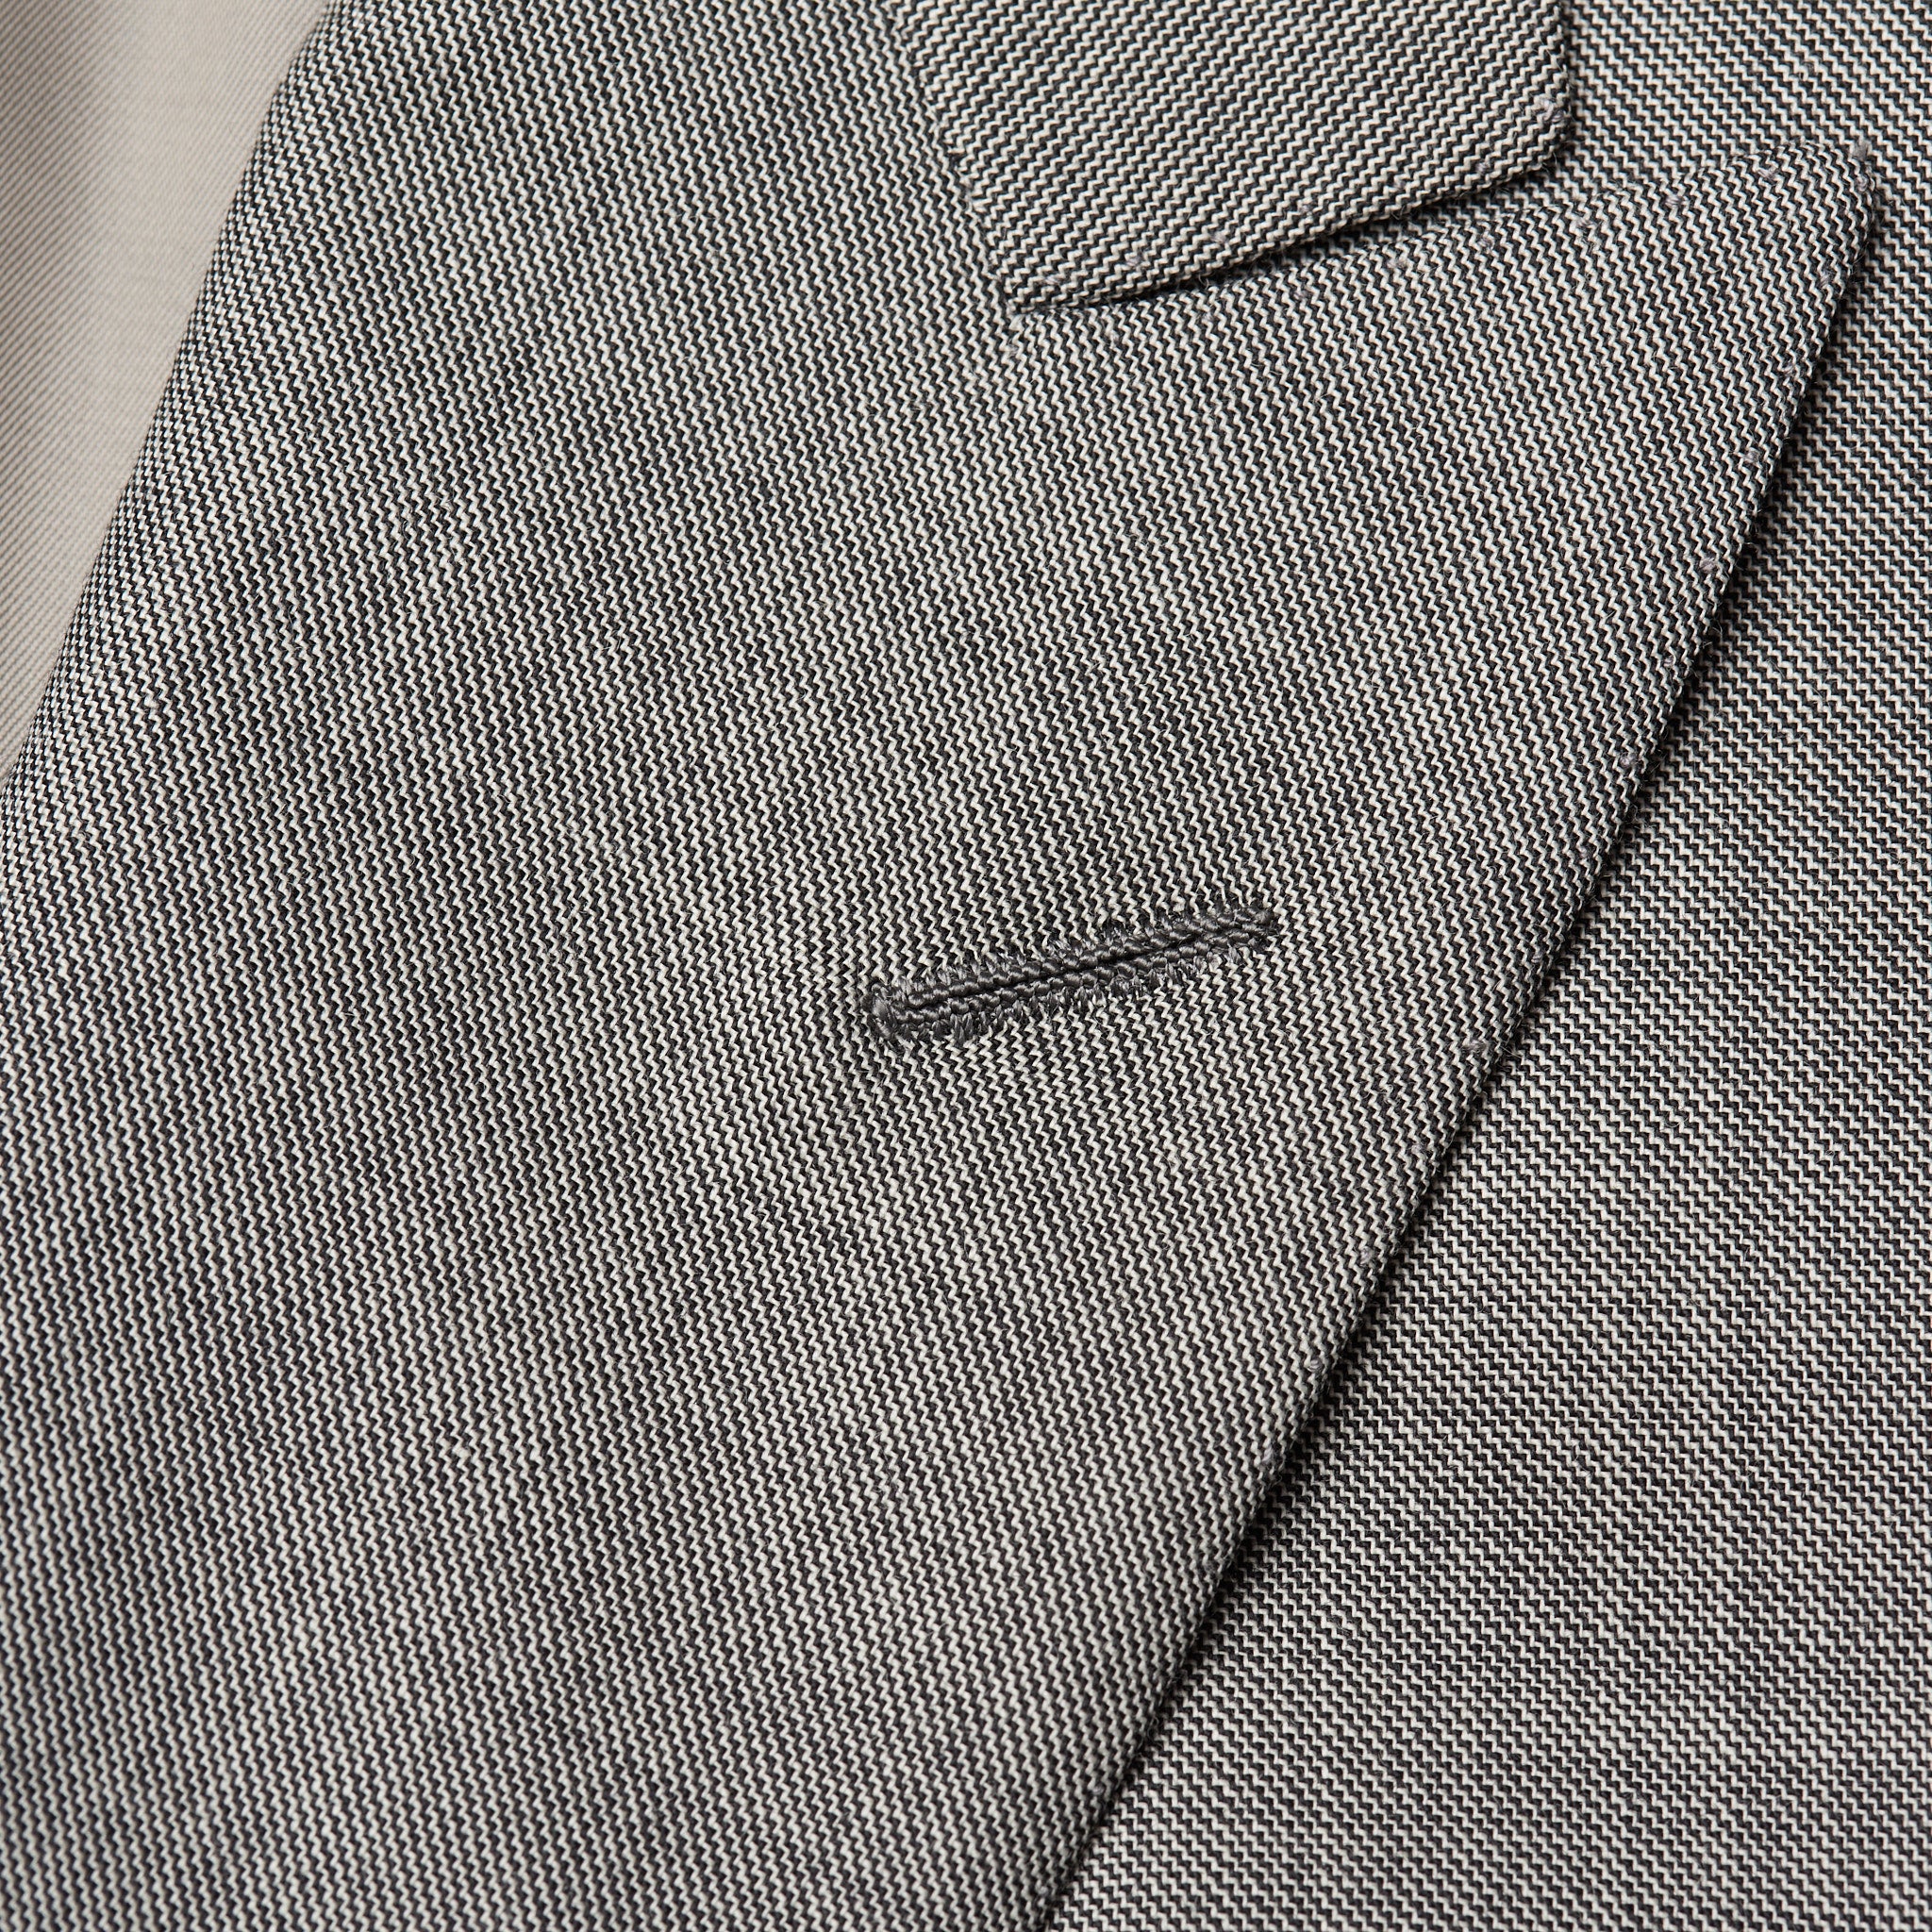 D'AVENZA Handmade Gray Wool Double Breasted Suit EU 52 NEW US 42 D'AVENZA